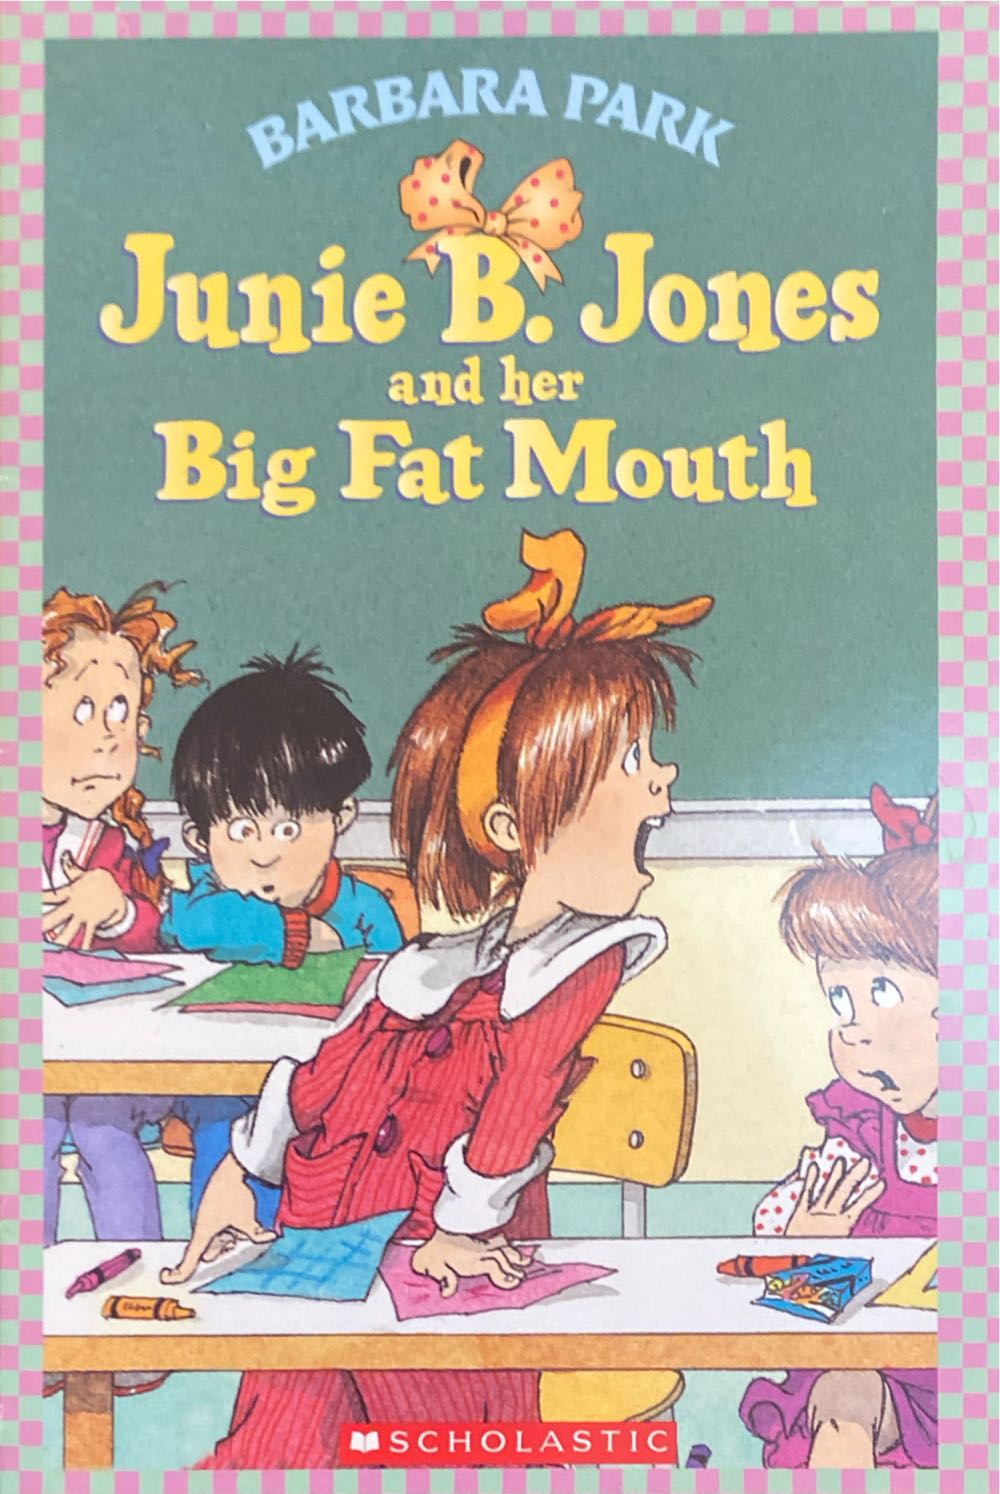 Junie B. Jones #3 and Her Big Fat Mouth - Barbara Park (Random House - Paperback) book collectible [Barcode 9780679844075] - Main Image 3